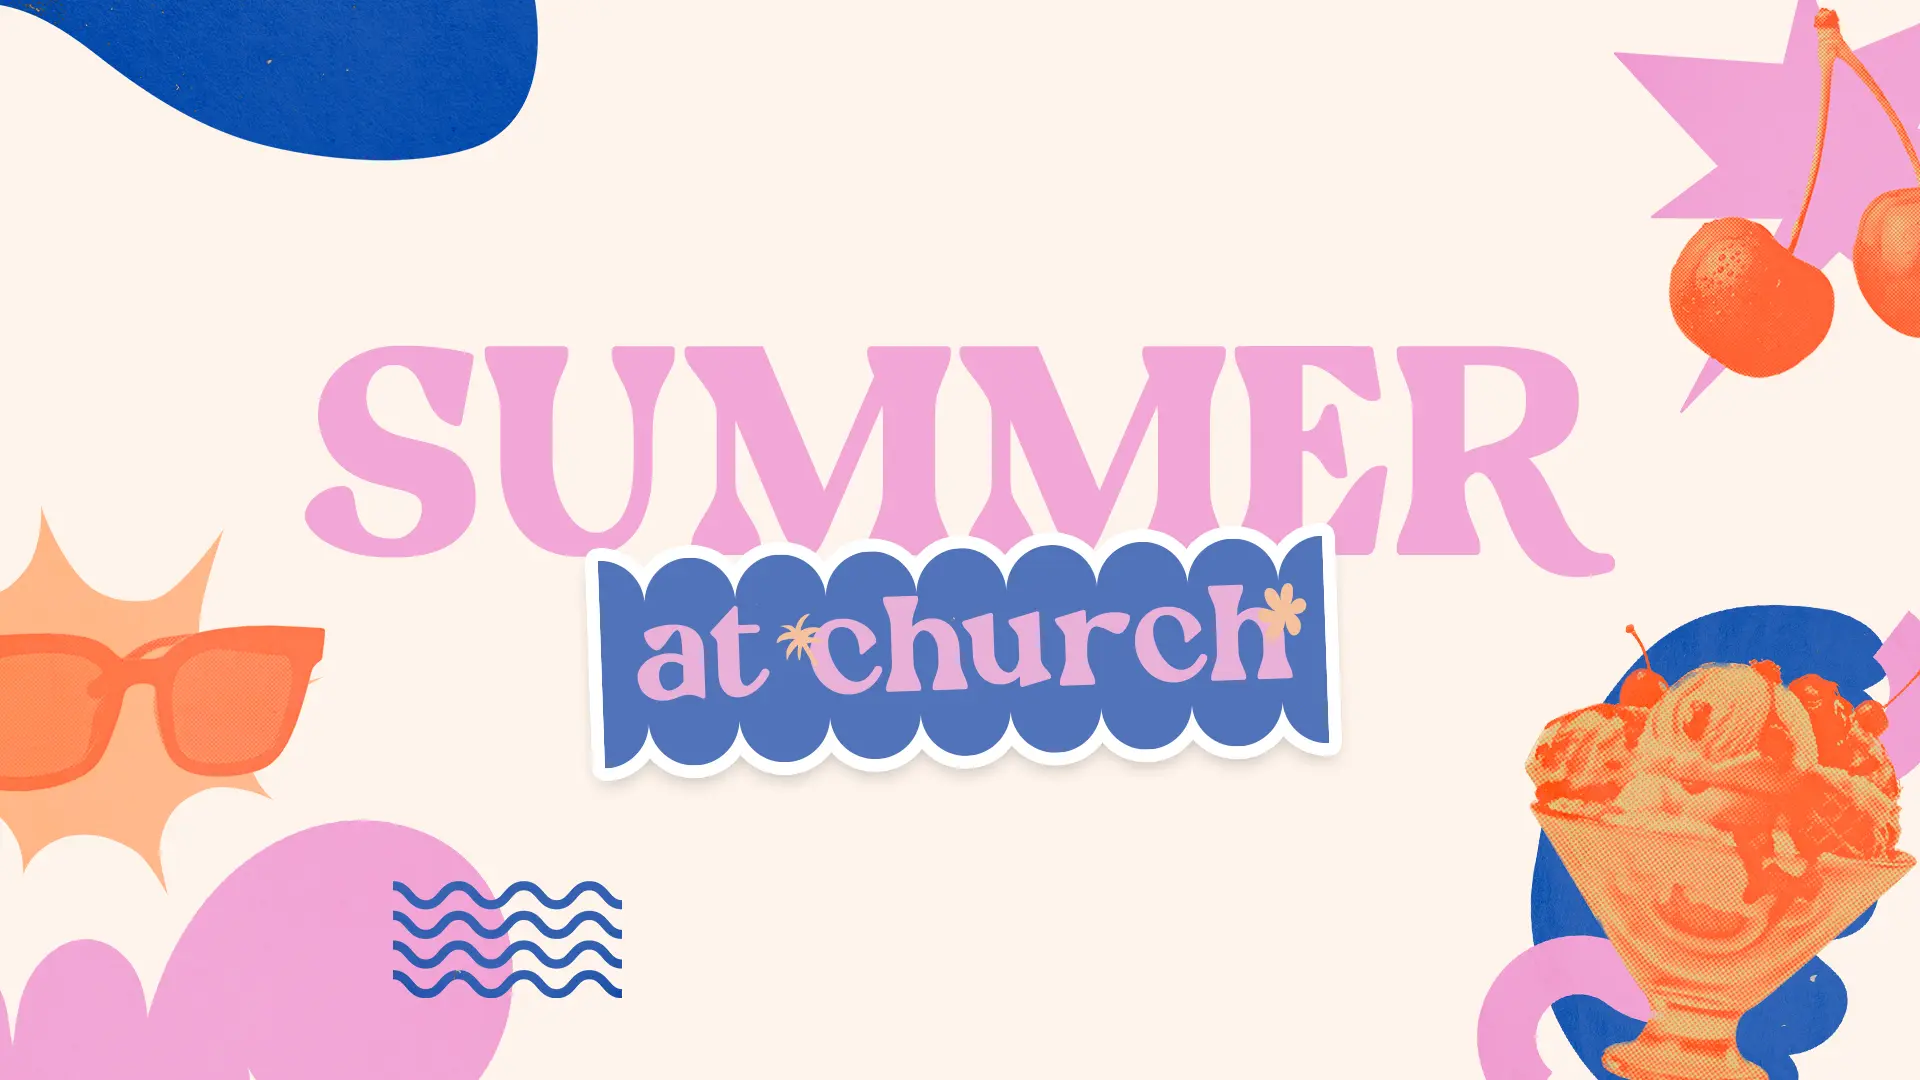 Welcome your community with a bright, cheerful "Summer at Church" graphic, perfect for promoting summer events and sermon series. The bold pink text pops against the cream background accented with whimsical shapes in vivid summer colors.